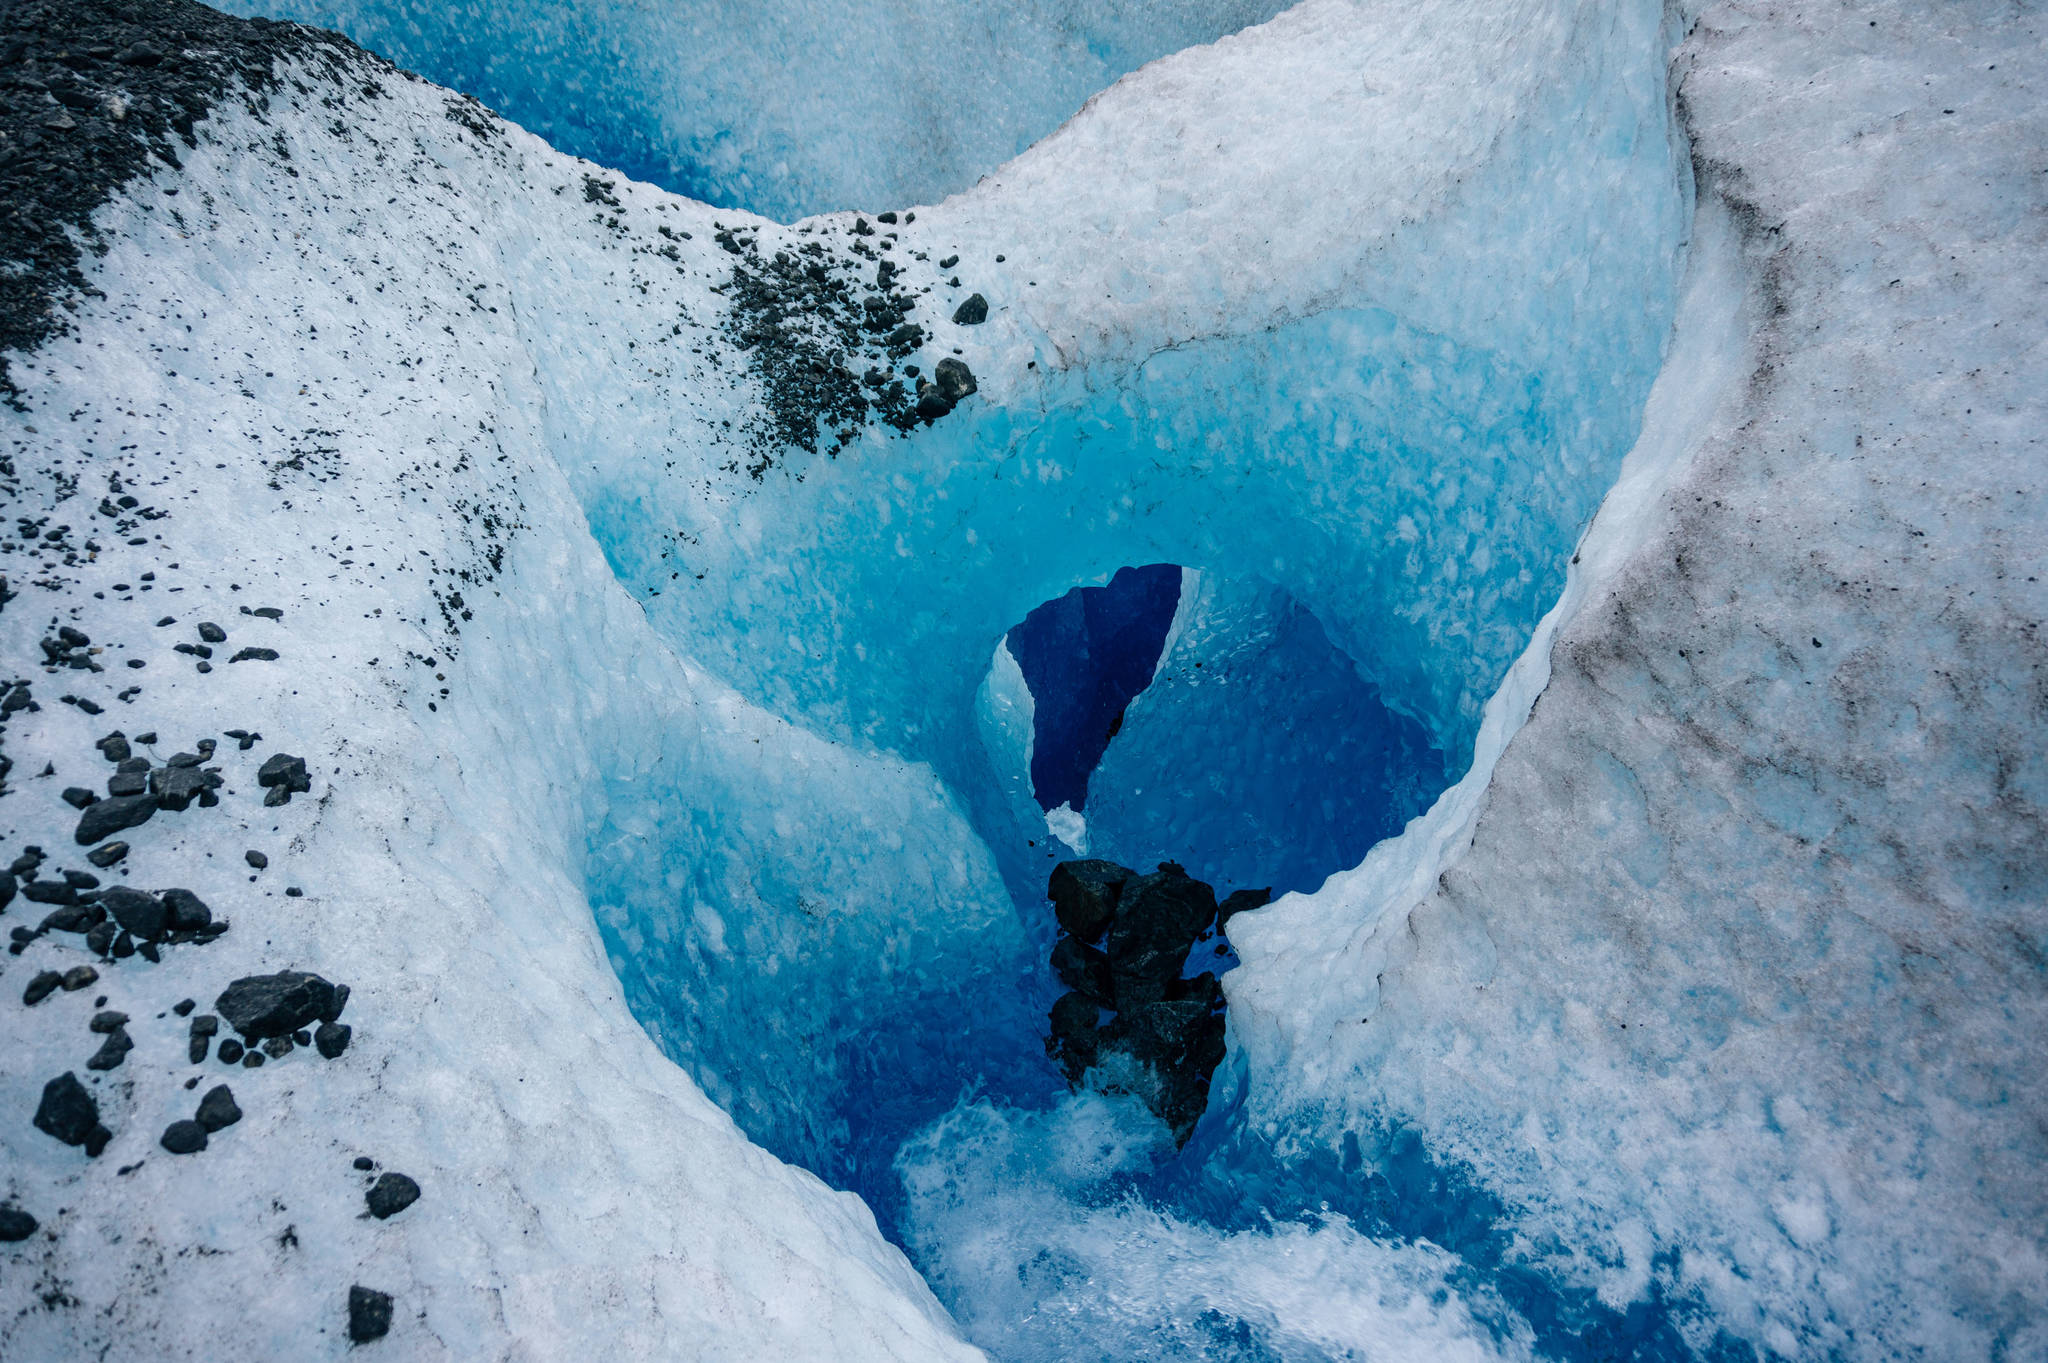 Stream carves glacier ice into tunnels, twists and turns. (Gabe Donohoe)